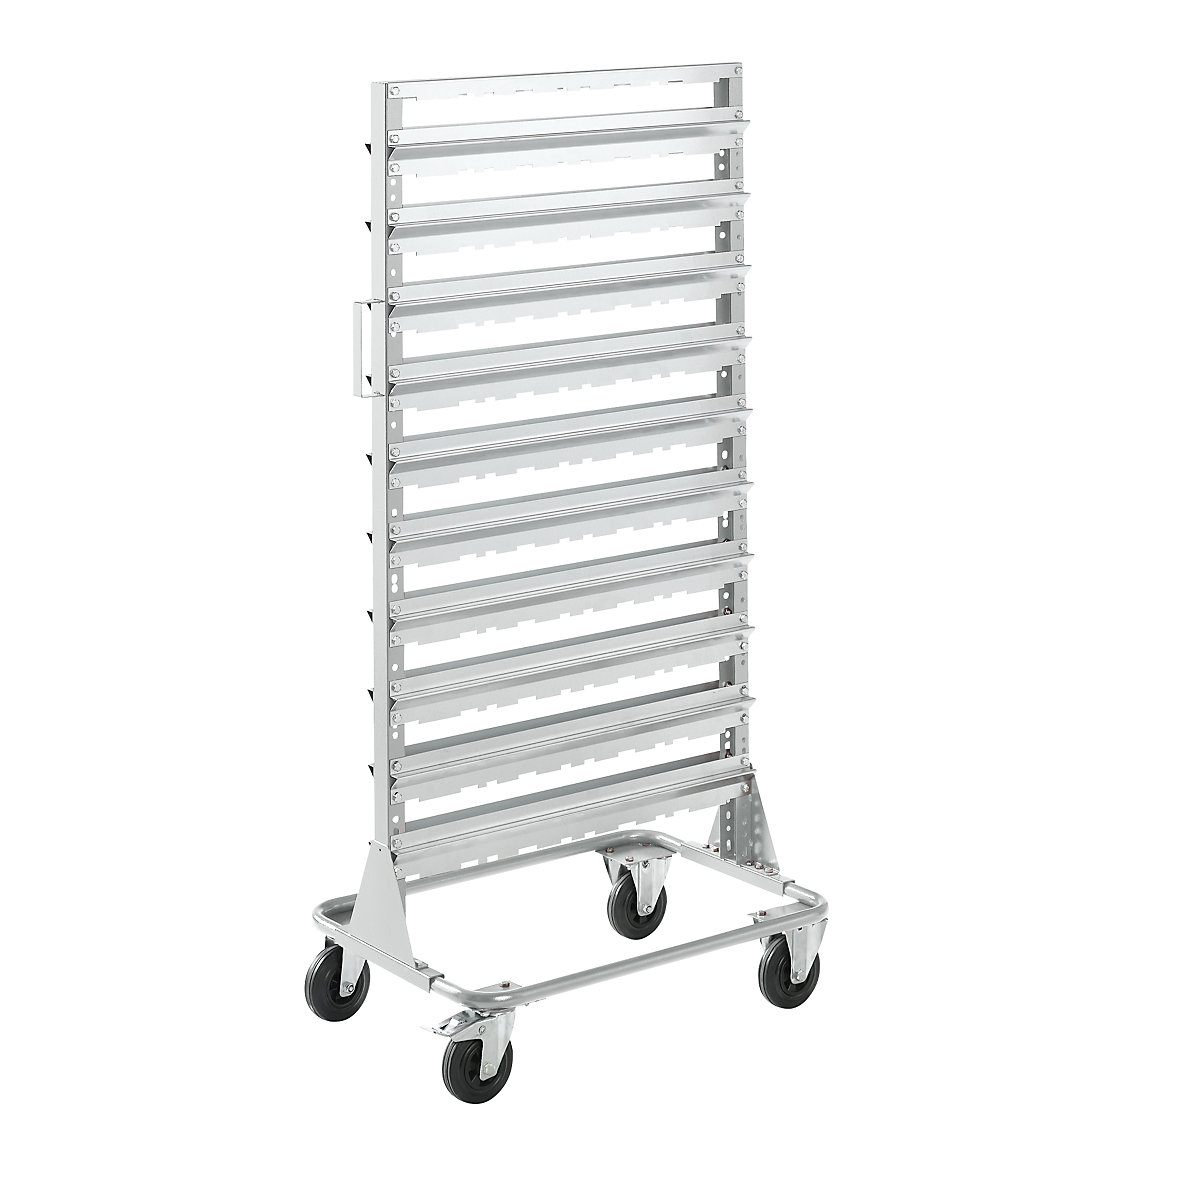 Mobile rack, height 1588 mm, mobile rack for 120 open fronted storage bins, light grey-4